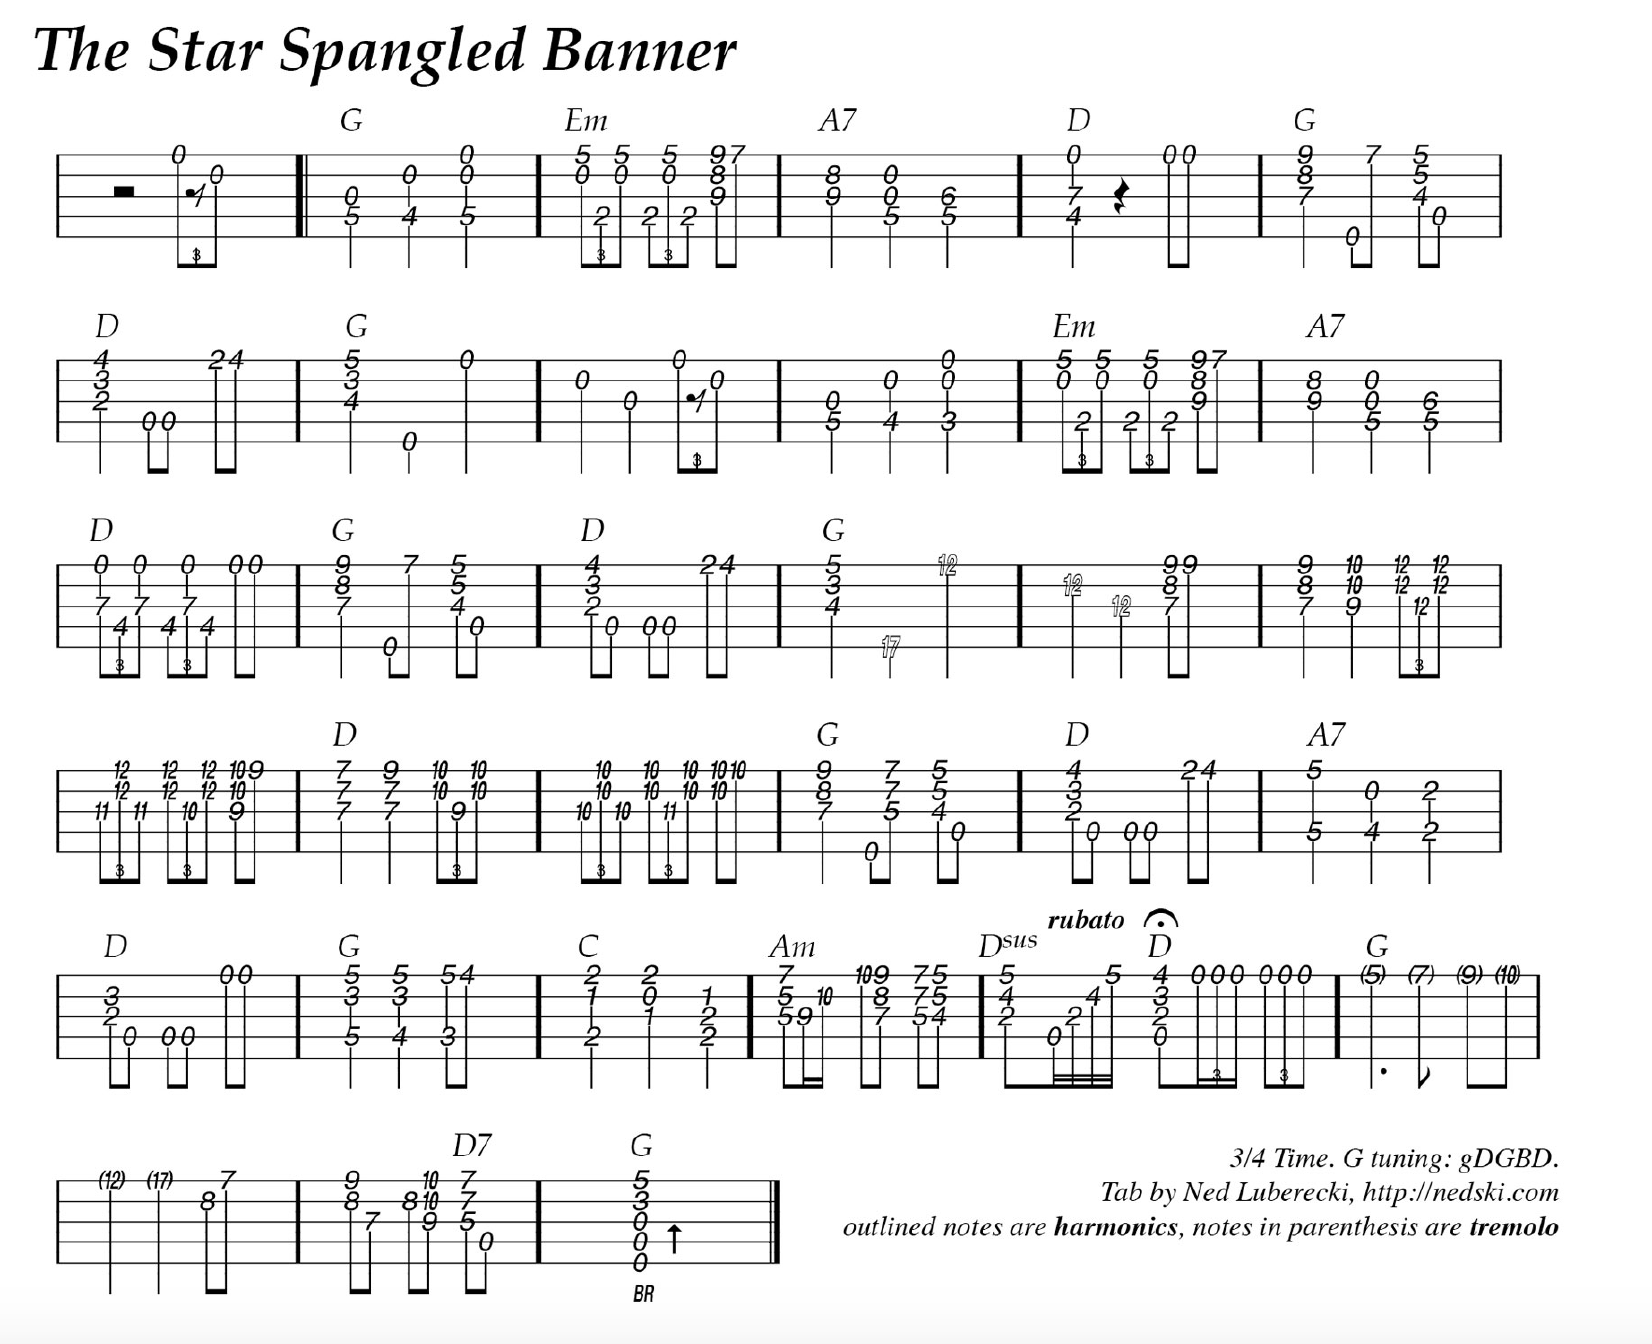 star spangled banner chords changes key of b flat